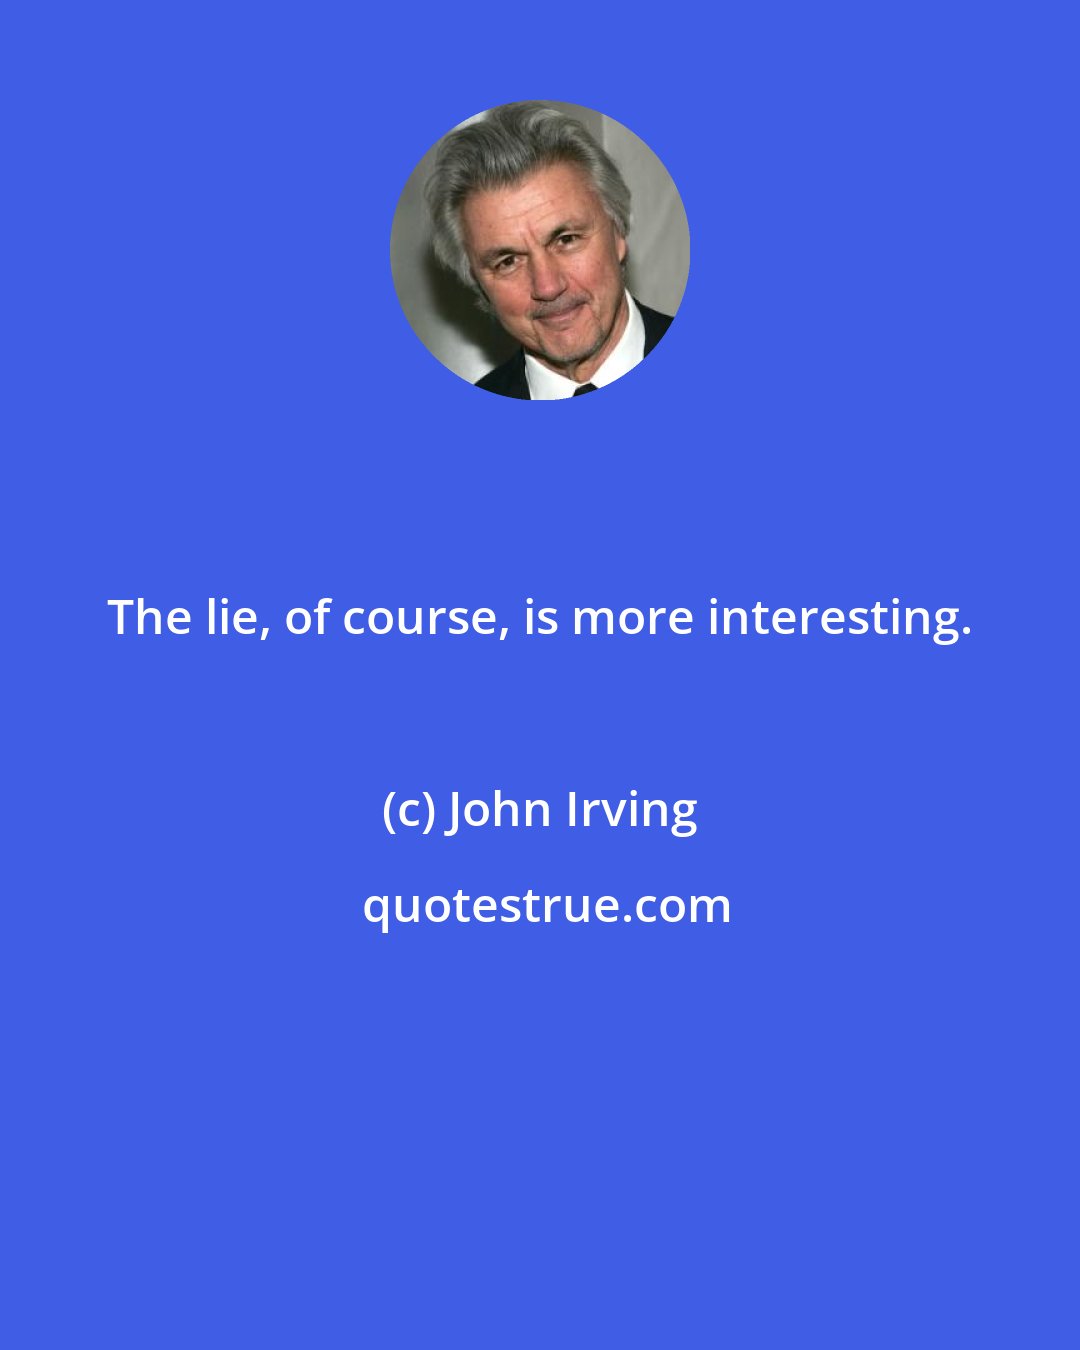 John Irving: The lie, of course, is more interesting.